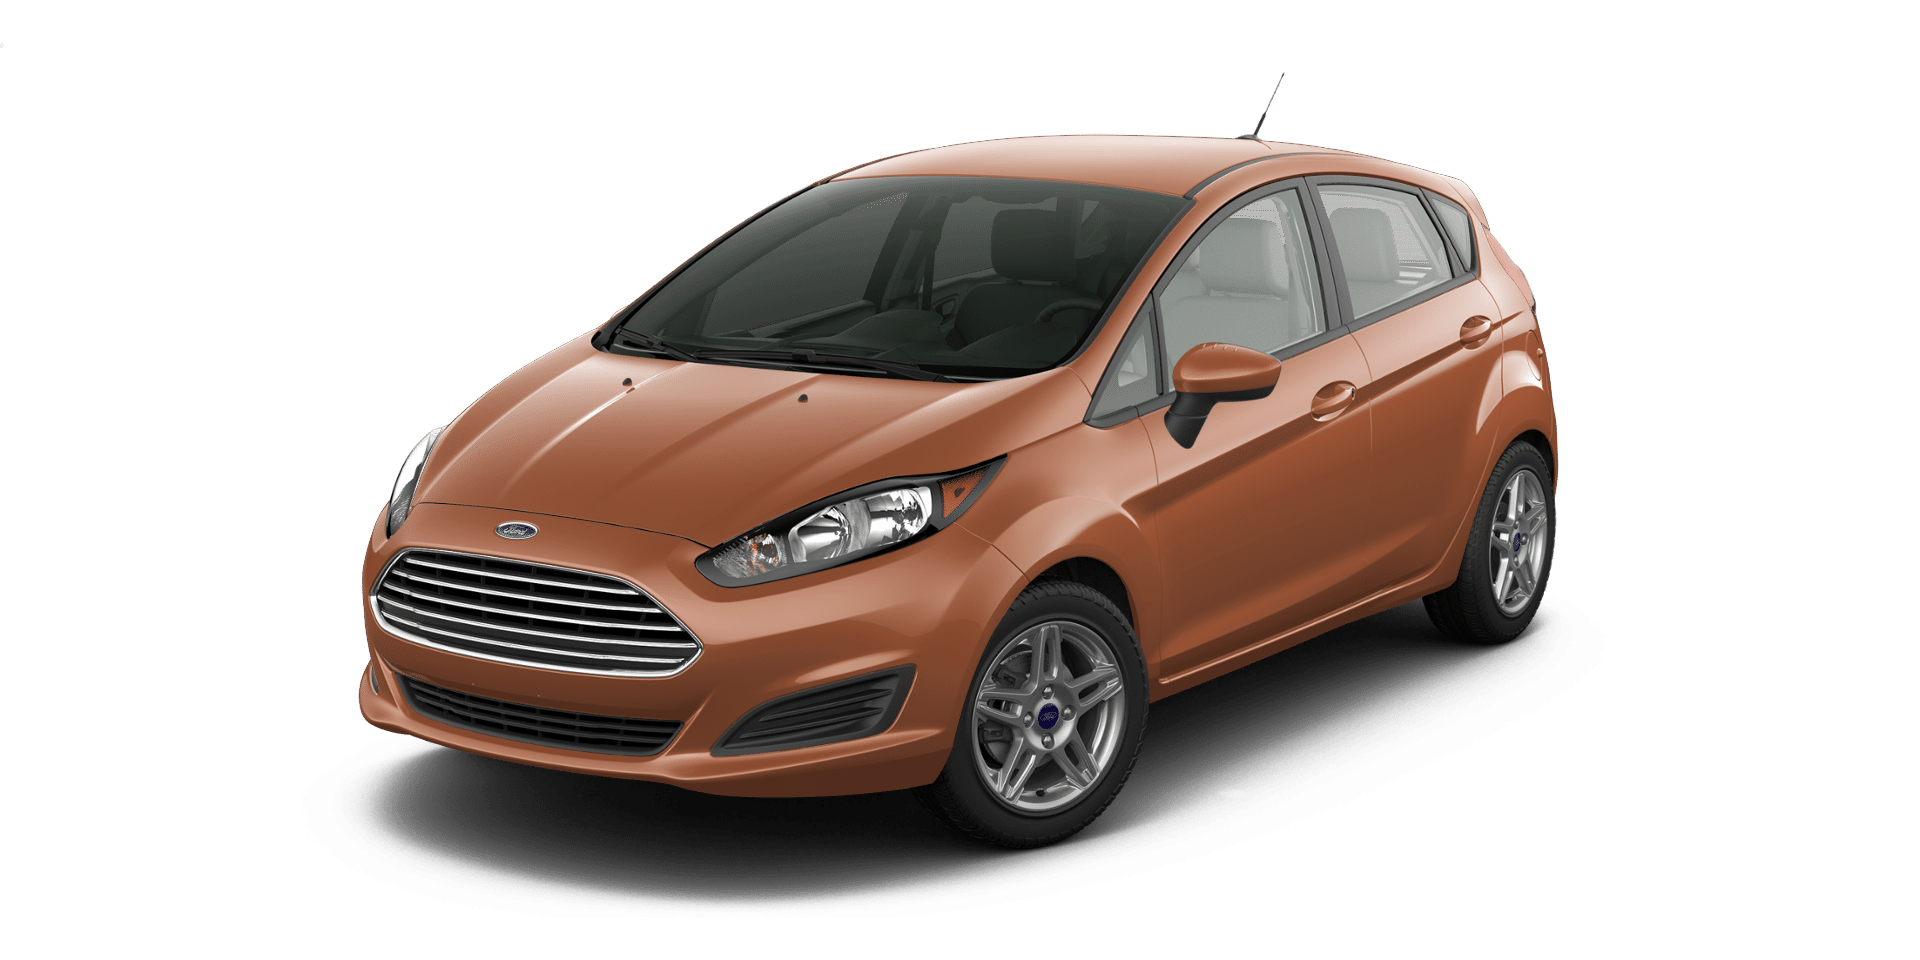 Ford Fiesta ST 2017 front cross view